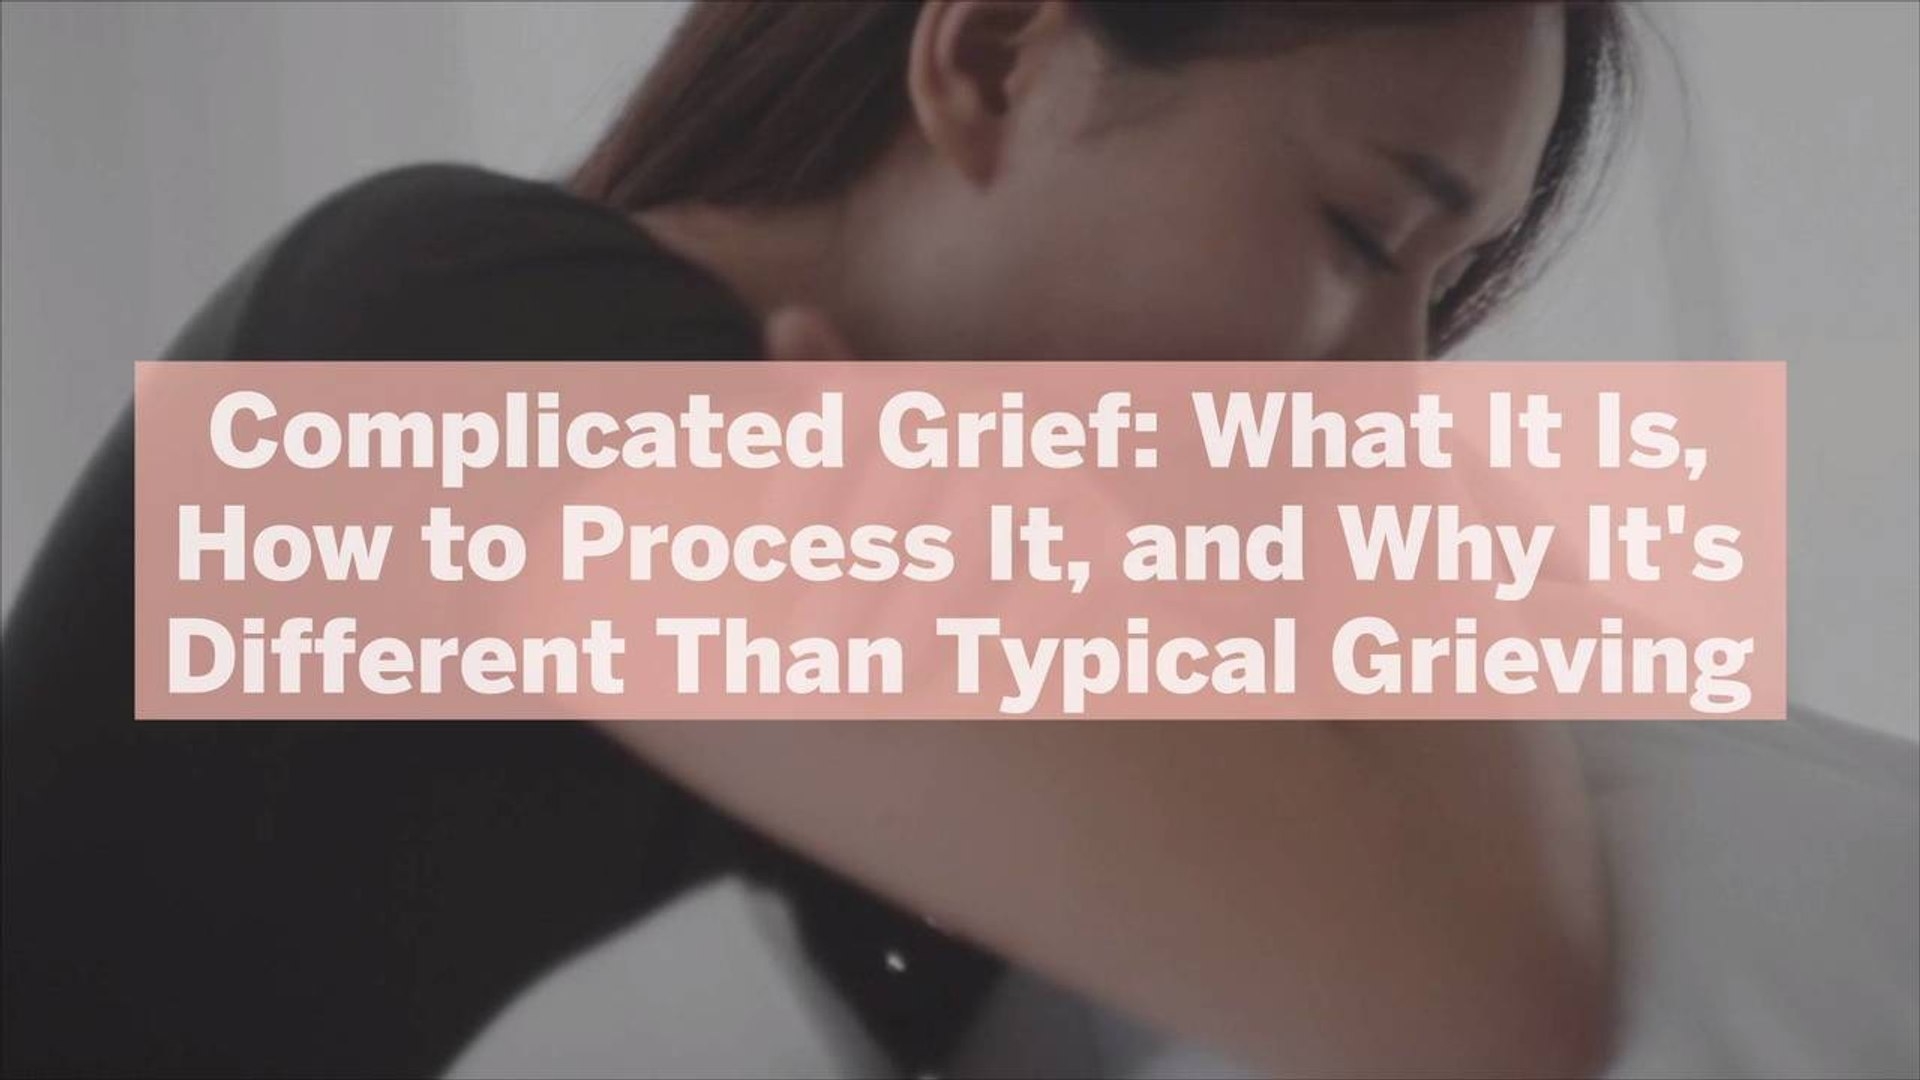 What is Complicated Grief?